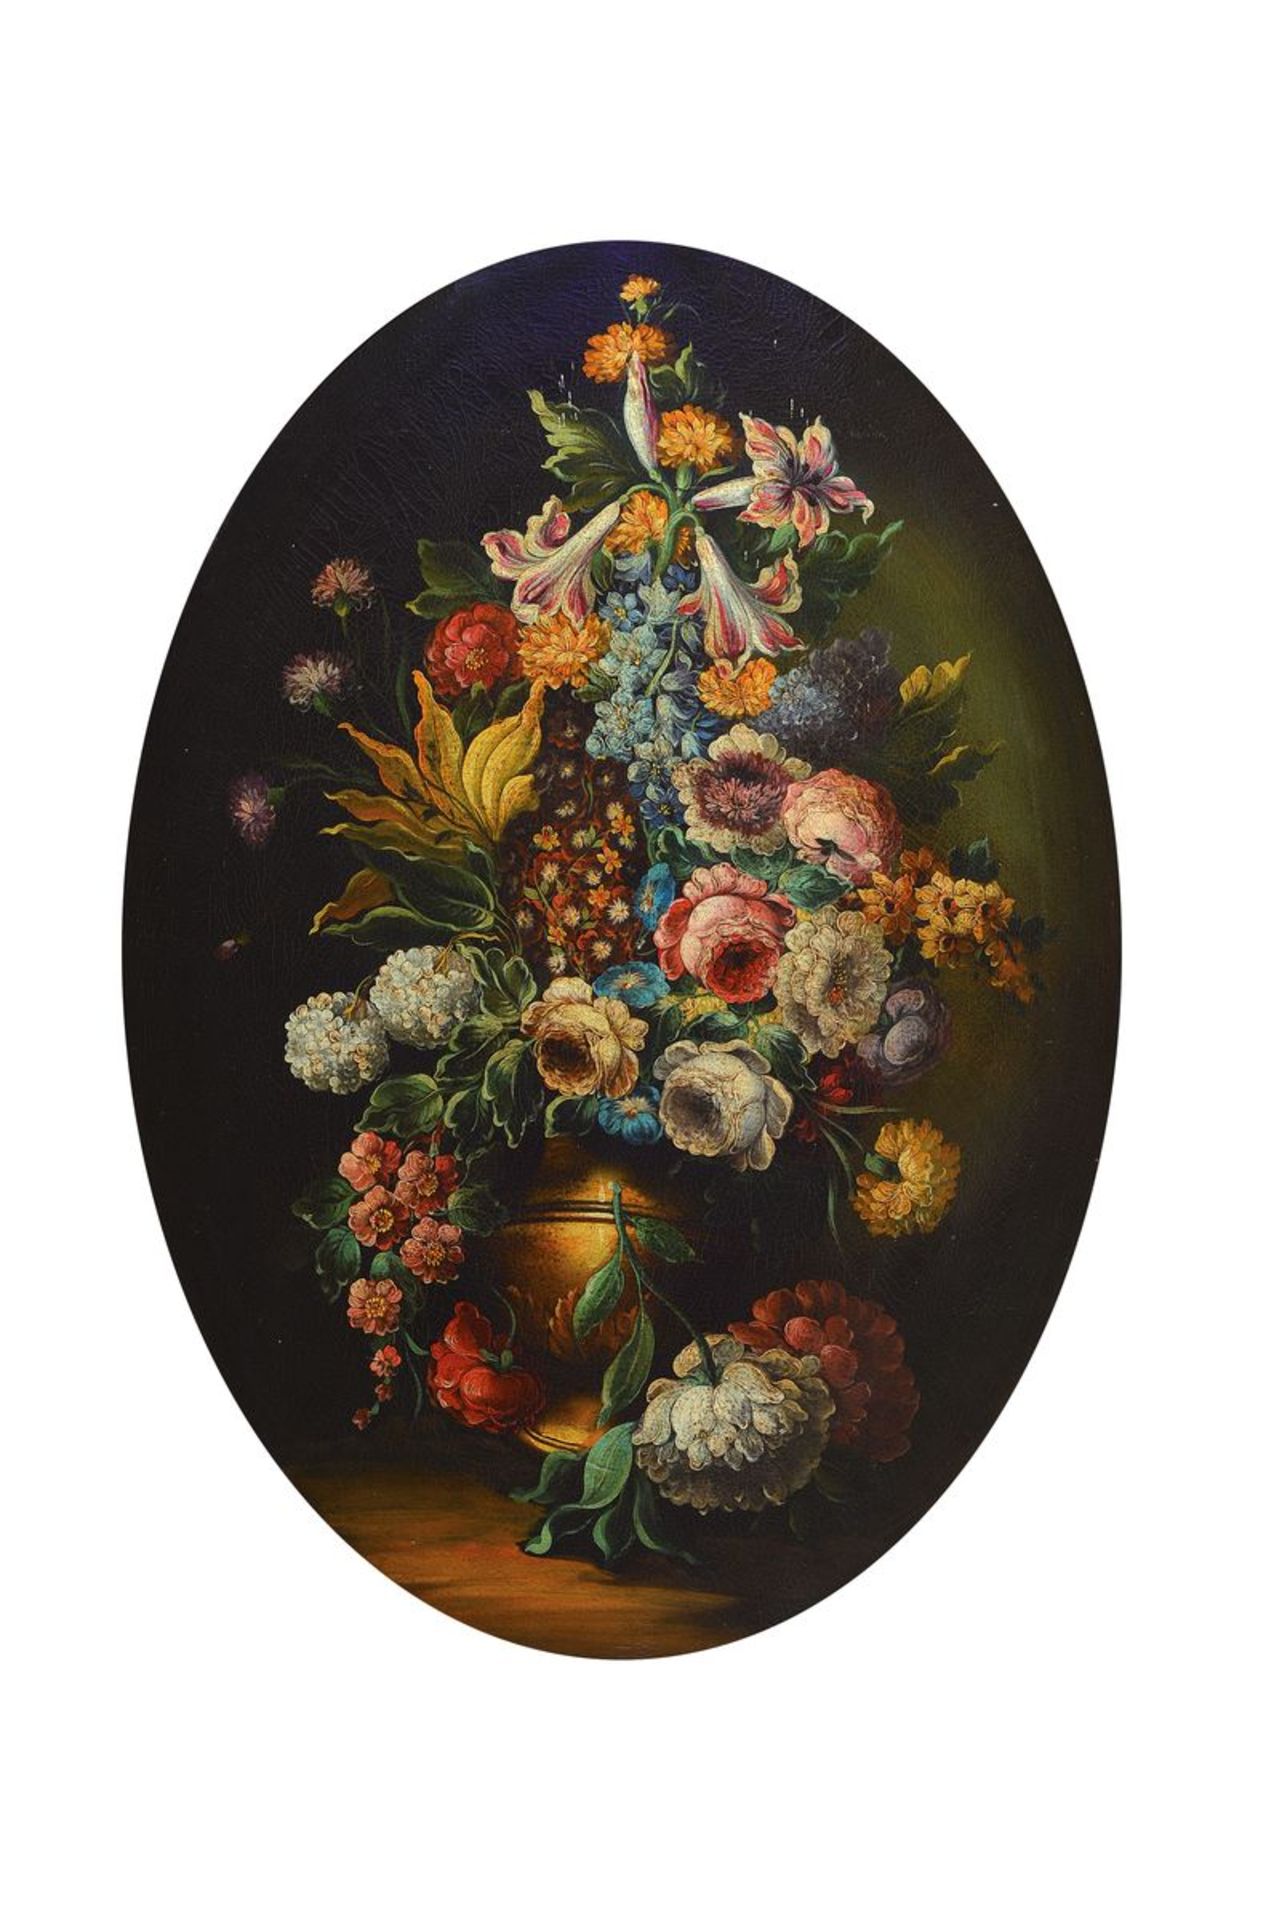 Unidentified artist, the Netherlands, 19th century, 2 counterparts: luxuriant still life with